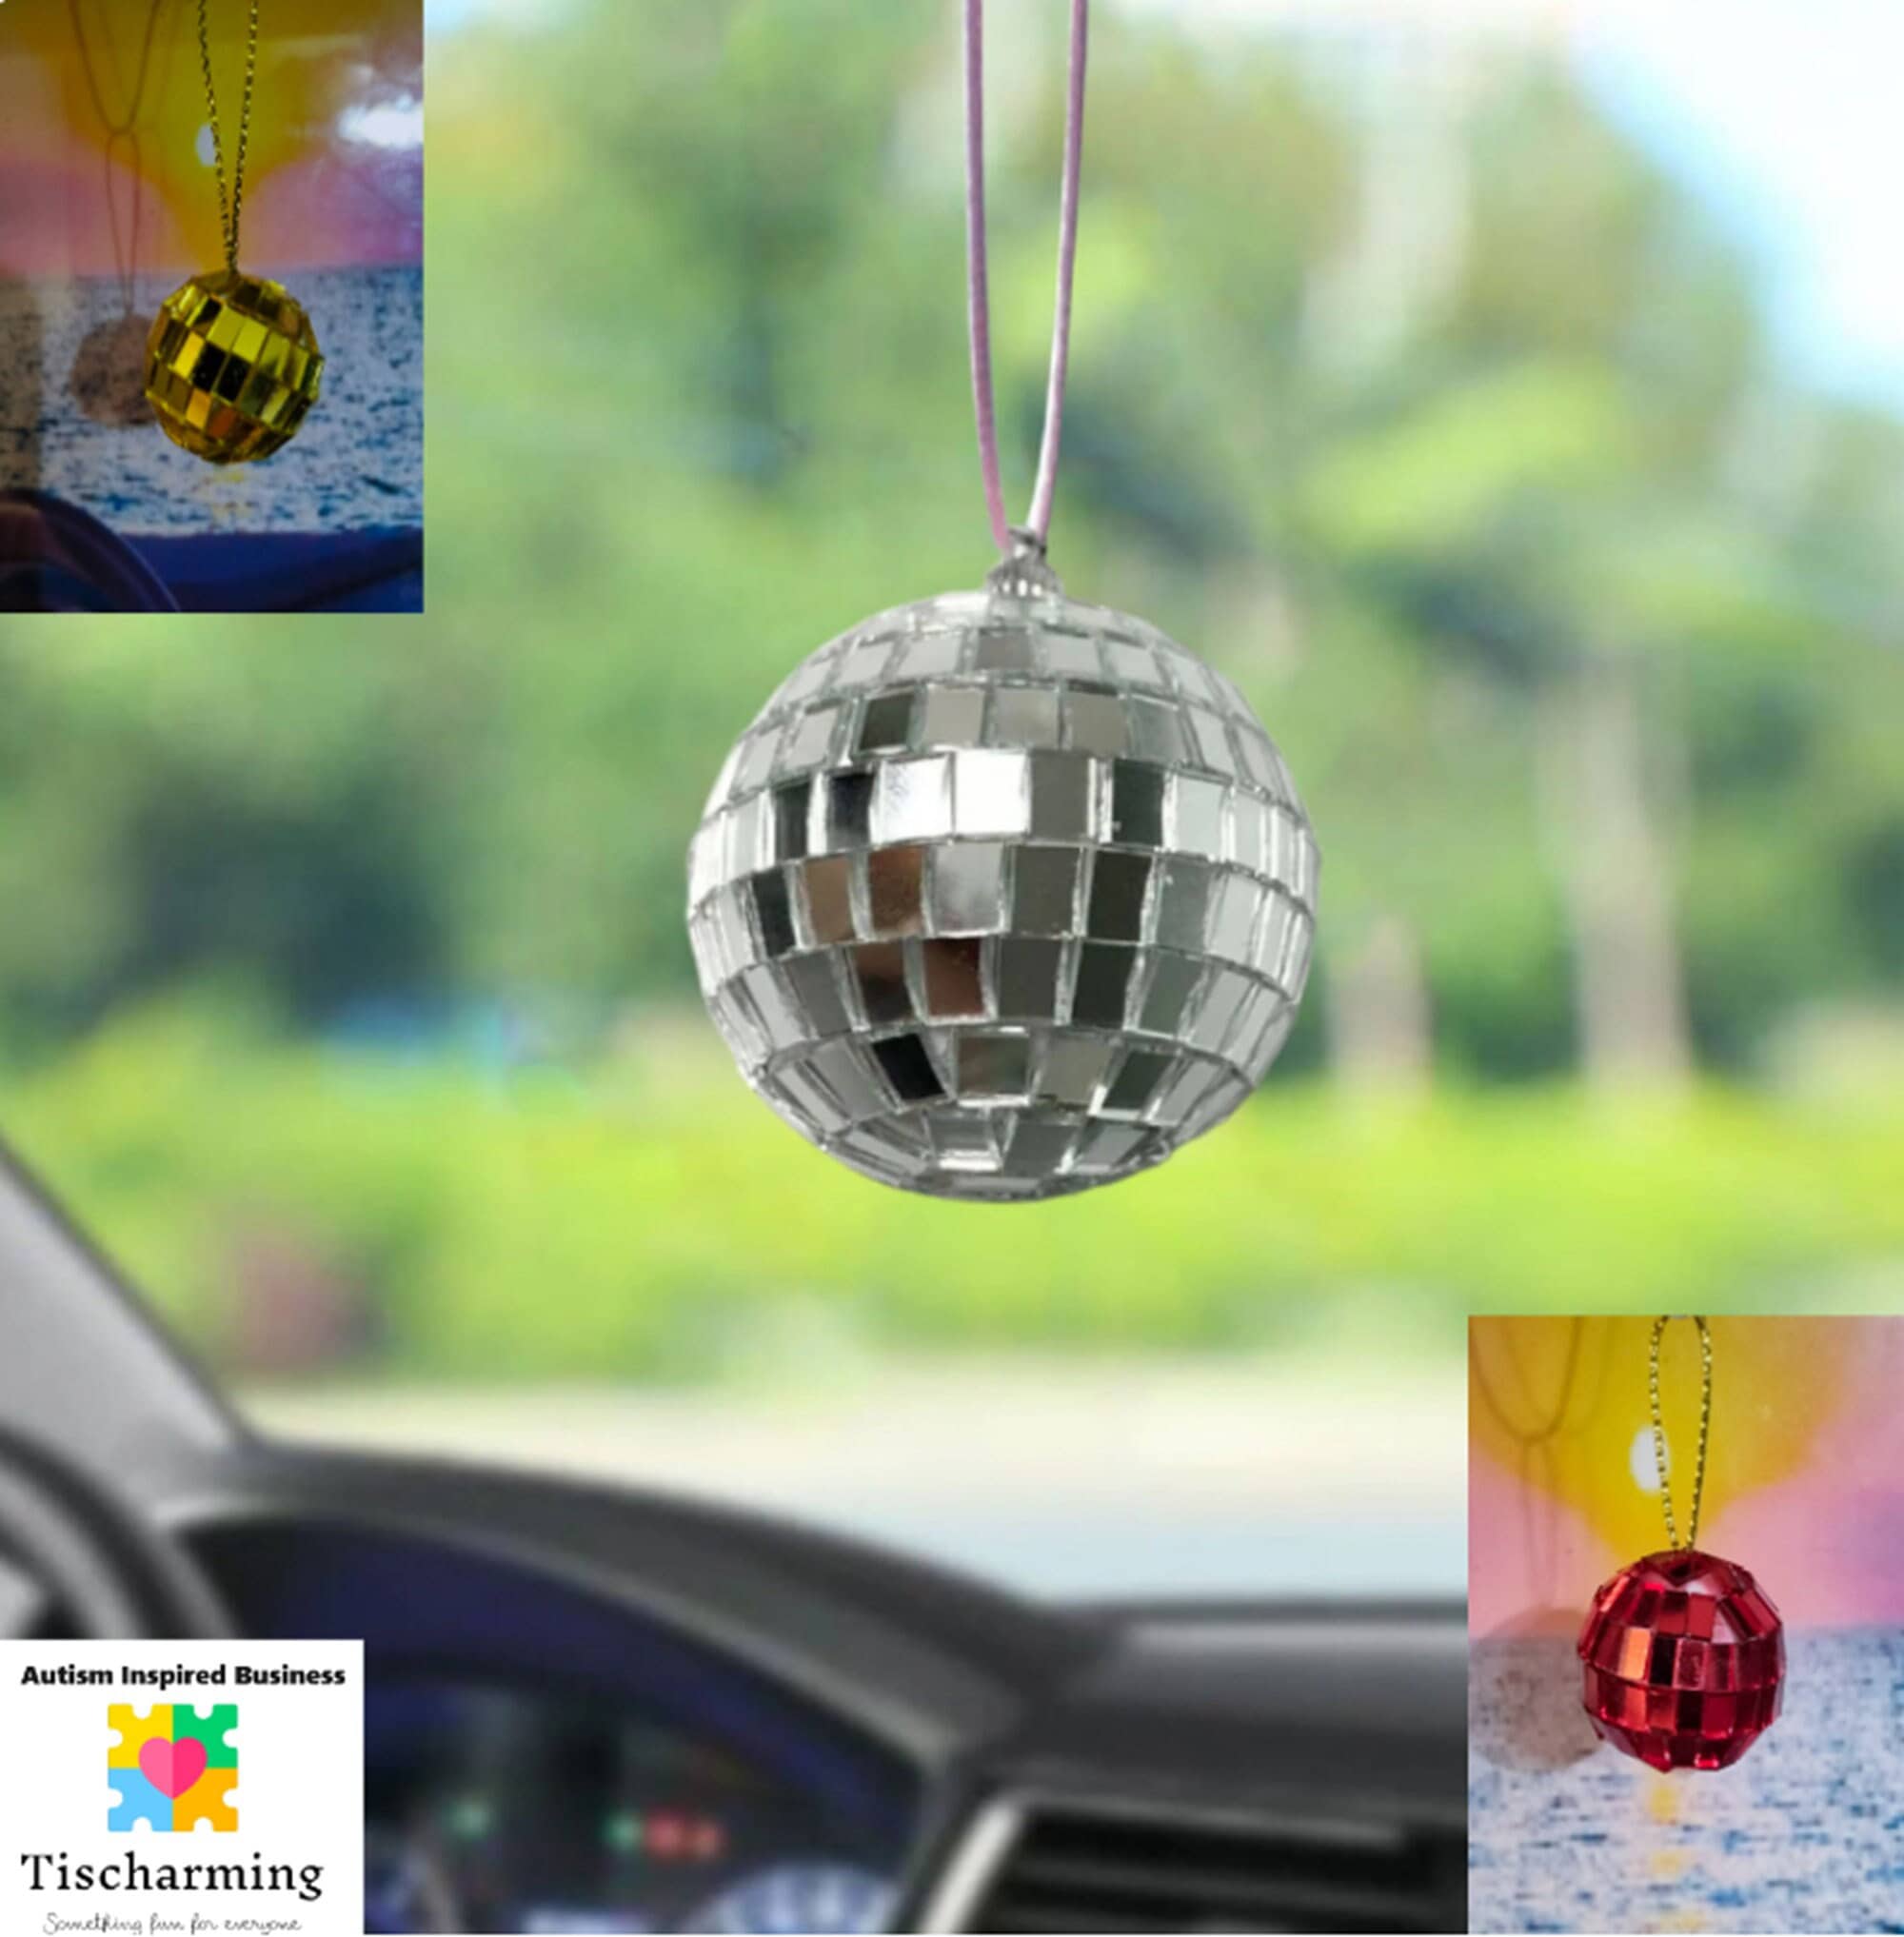 Mini Cowboy Globe Keychain With Disco Ball Car Charm And Rear View Hanger  From Haoyunduo, $11.32